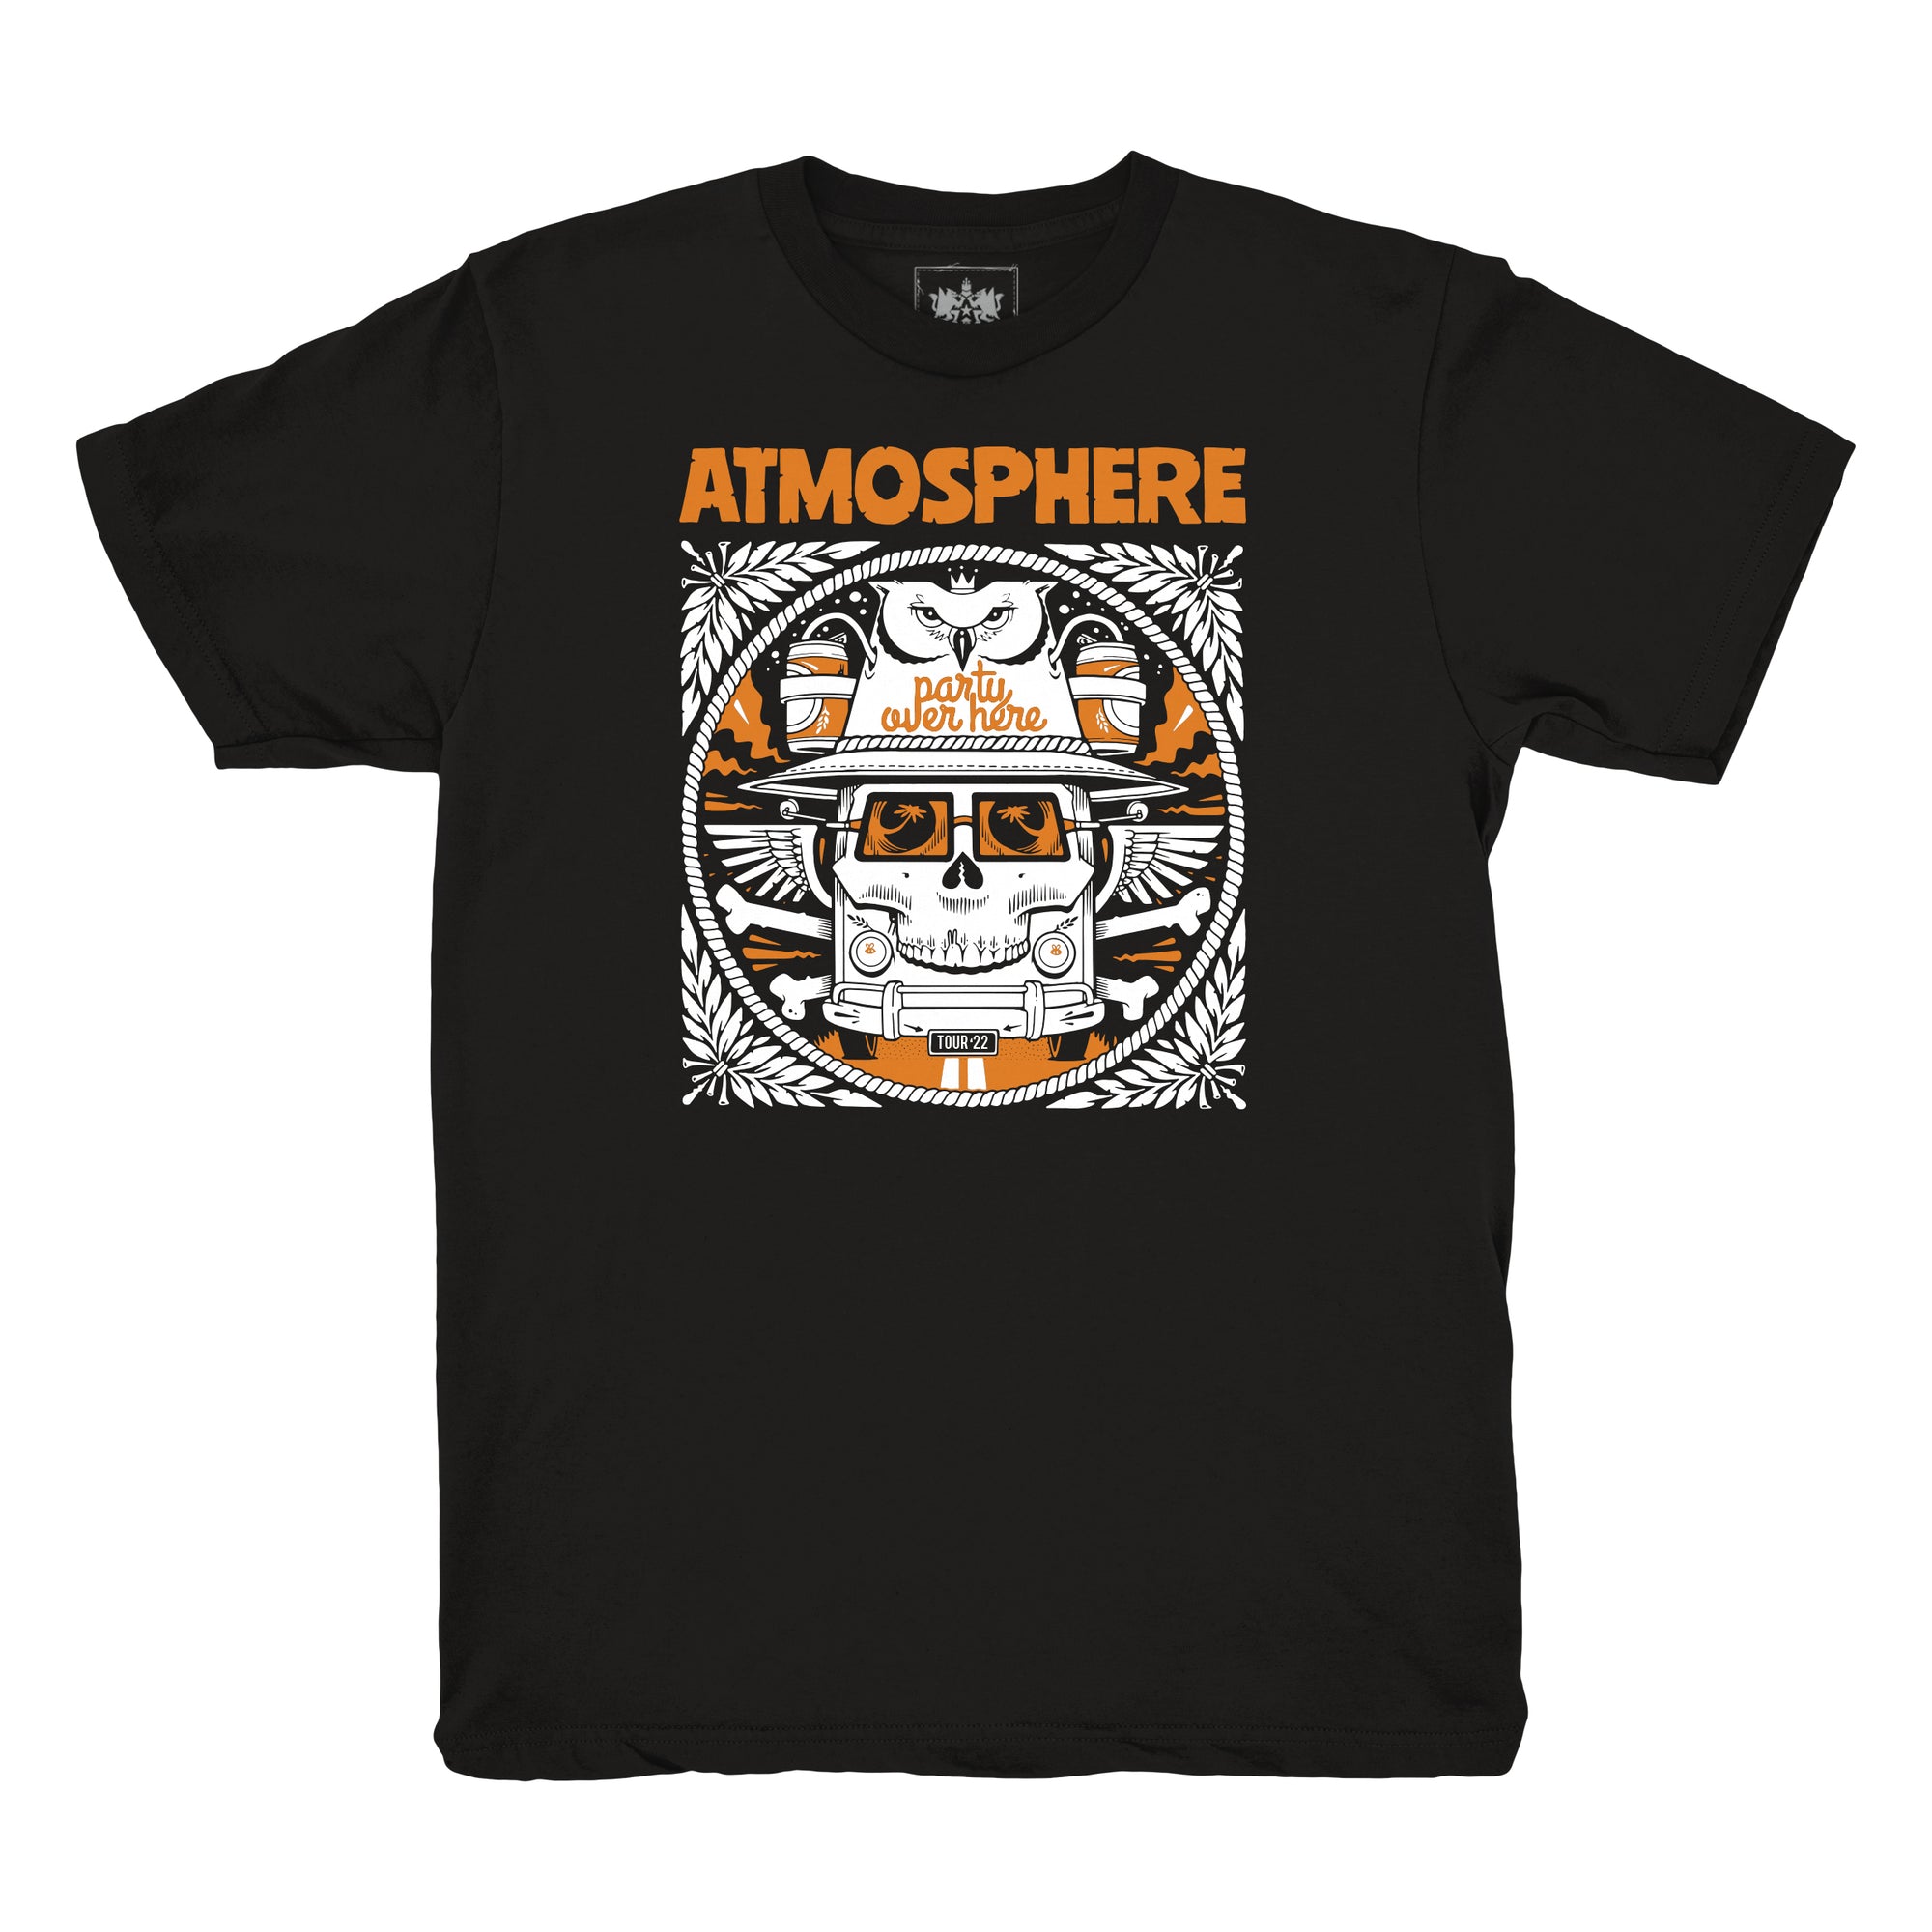 Atmosphere - Party Over Here Tour Shirt